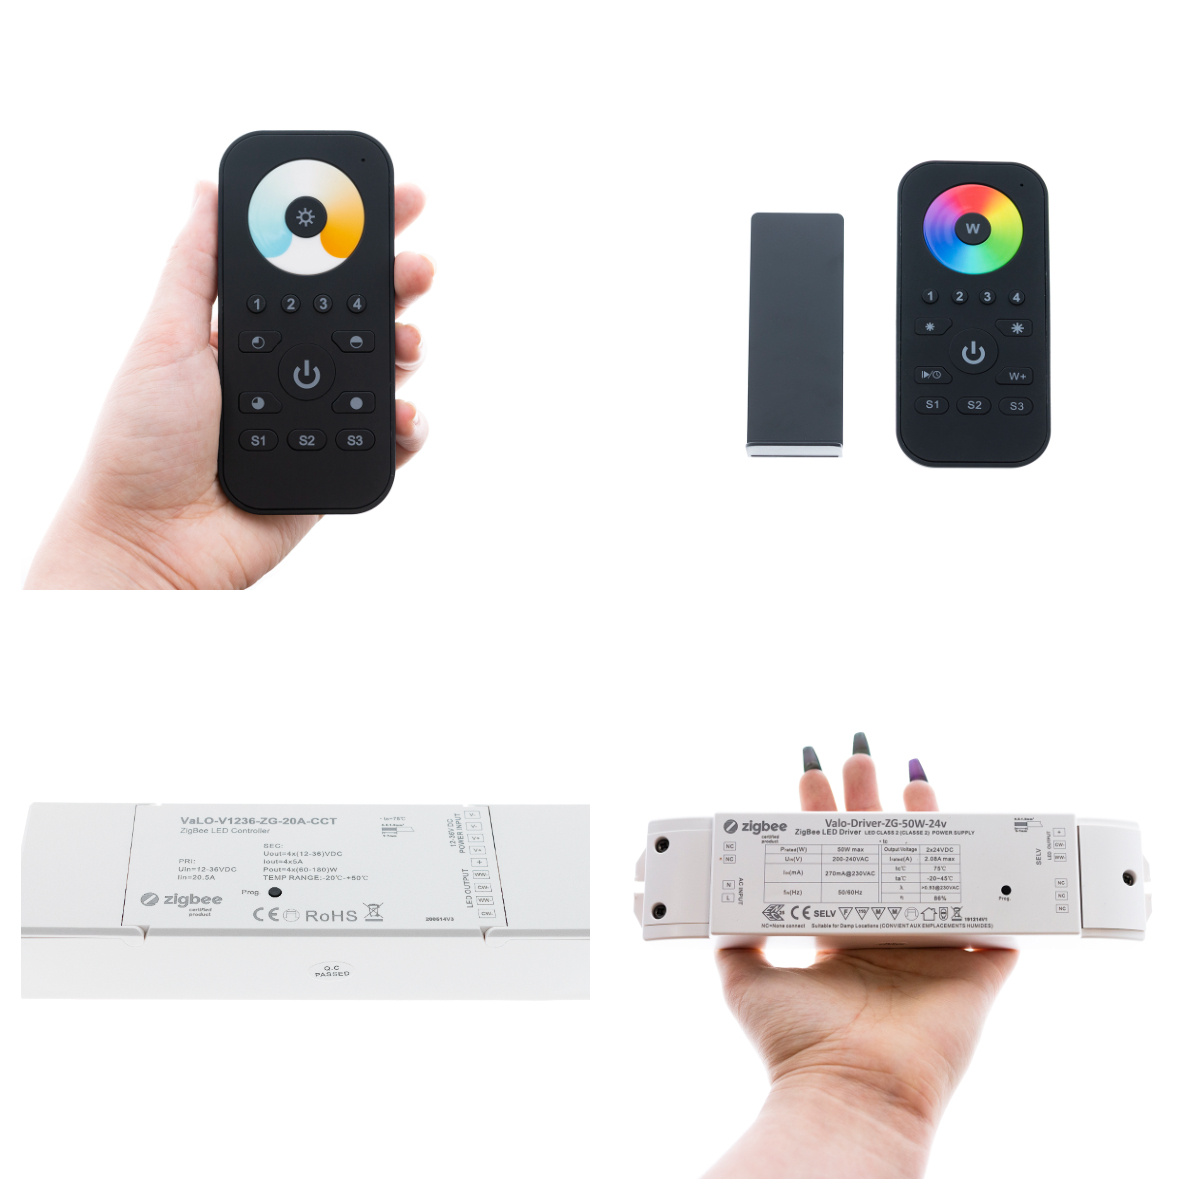 Top row with Zigbee remote controls, white light from cool white to warm white, and colour-changing RGB LED strip. The remotes have a magnet to attach it to a bracket that screws into the wall, for example. Remote controls and receivers with corresponding colour temperature control or colour changing functions are paired to the hub for versatile control and scheduling.